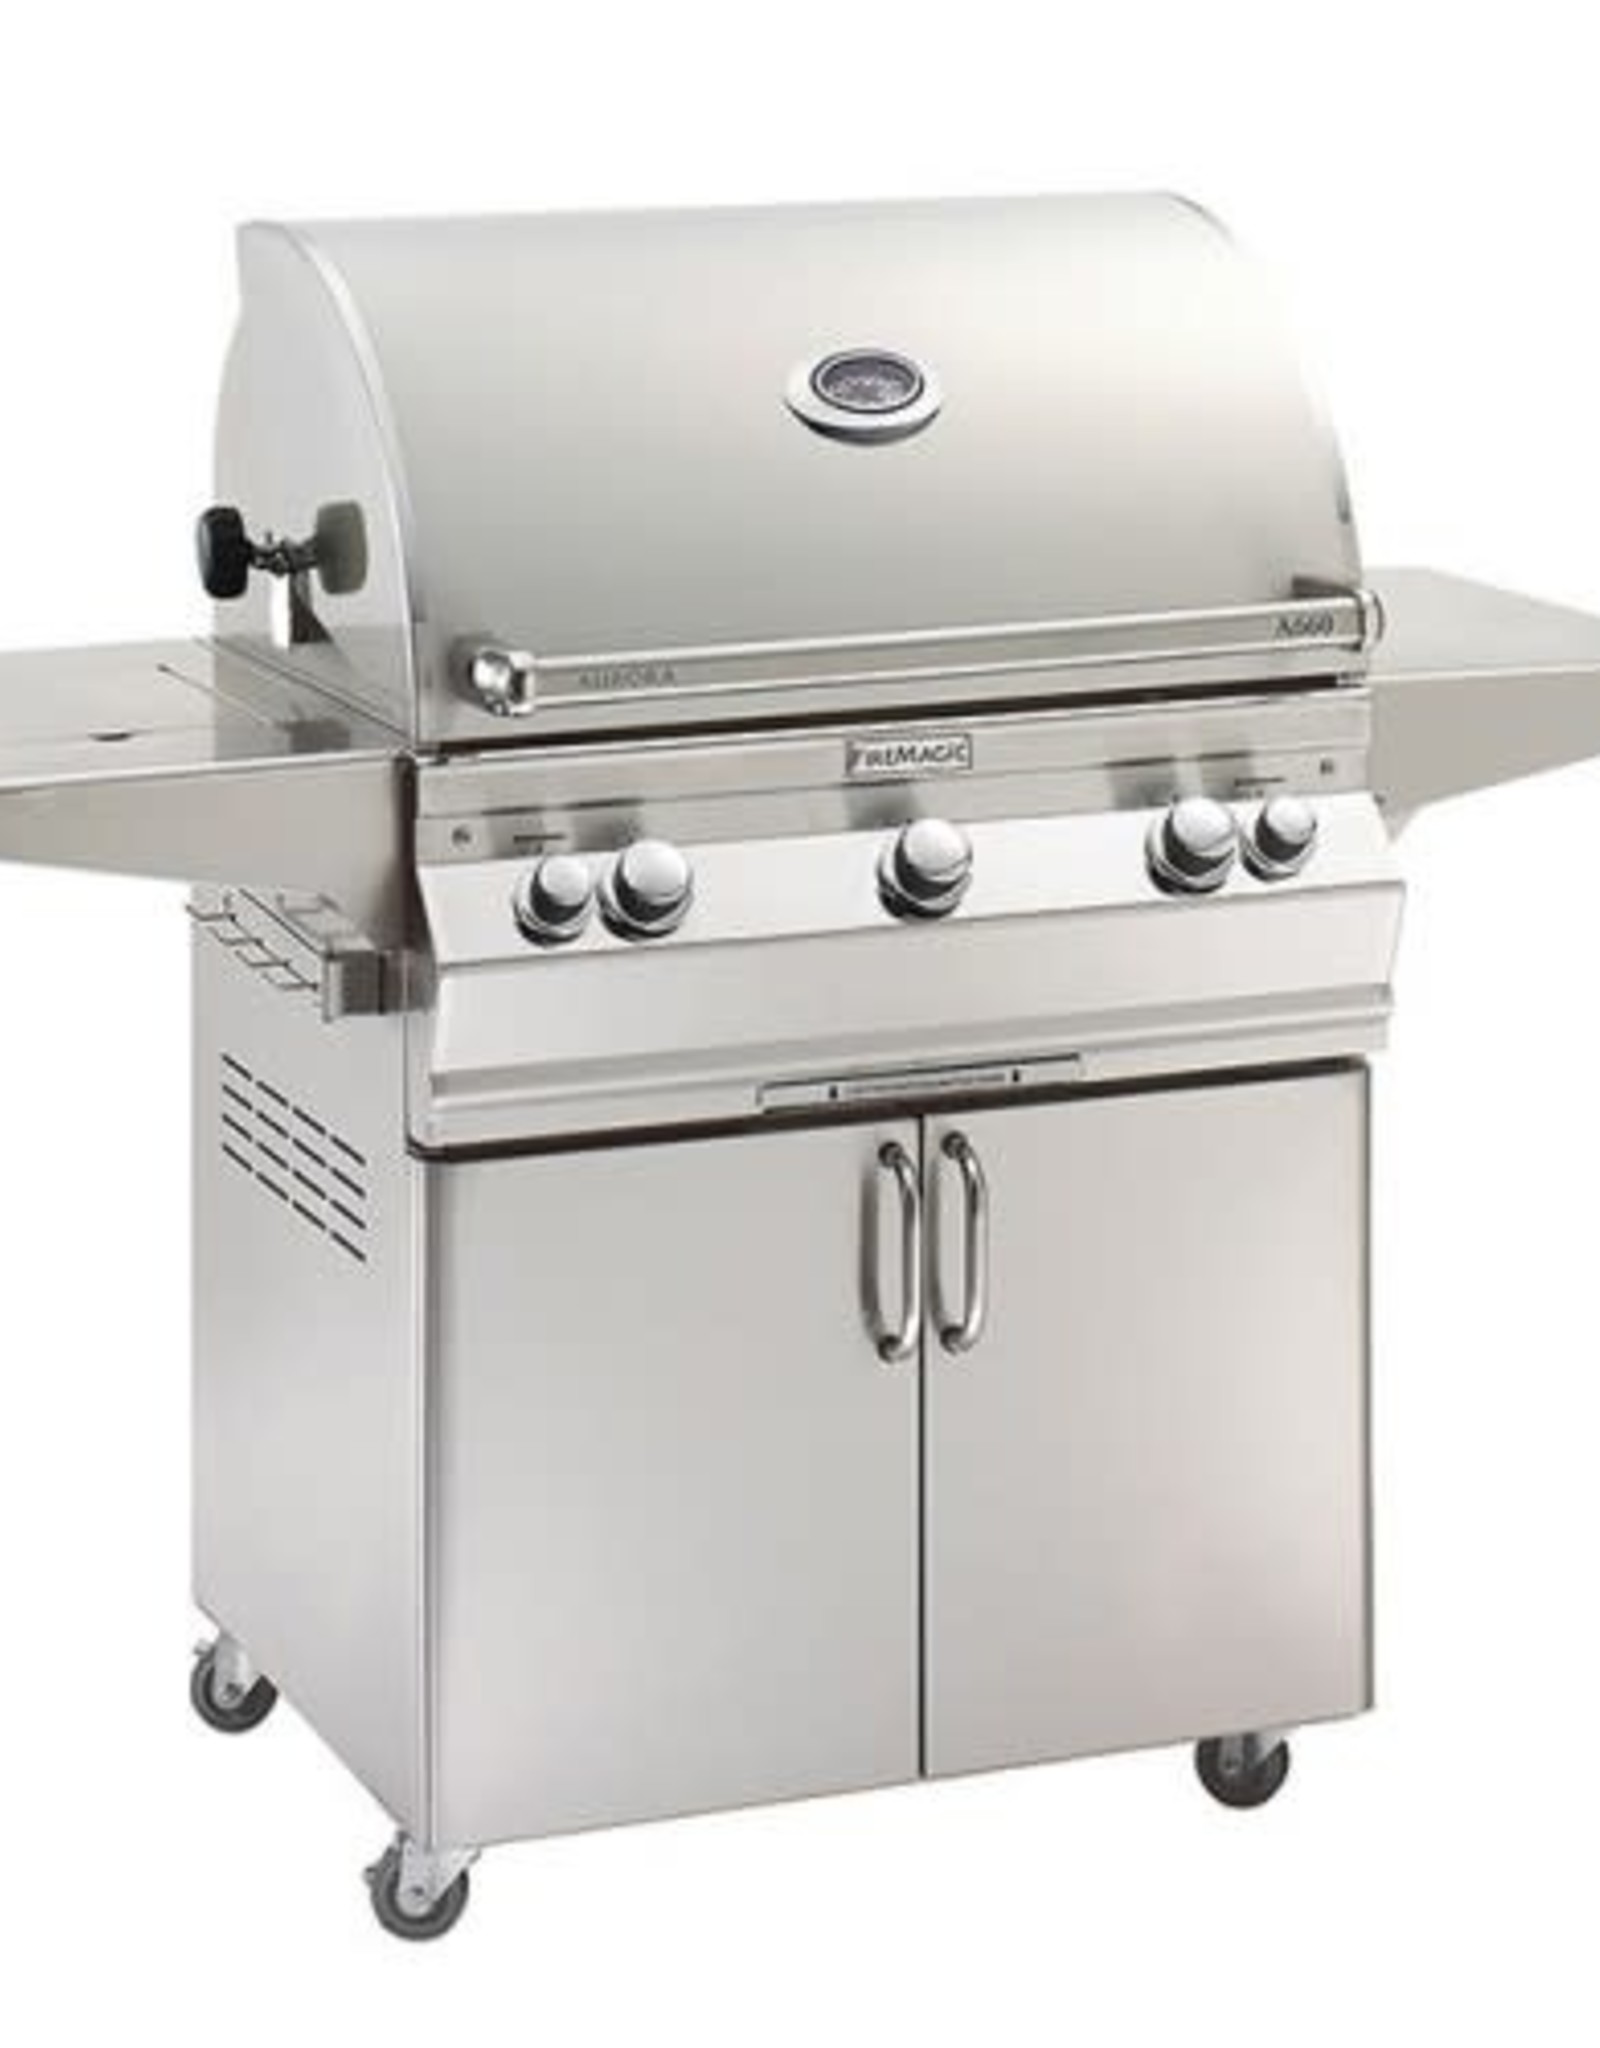 Fire Magic Fire Magic Aurora A660s 30-inch Portable Grill With Side Burner and Rotisserie